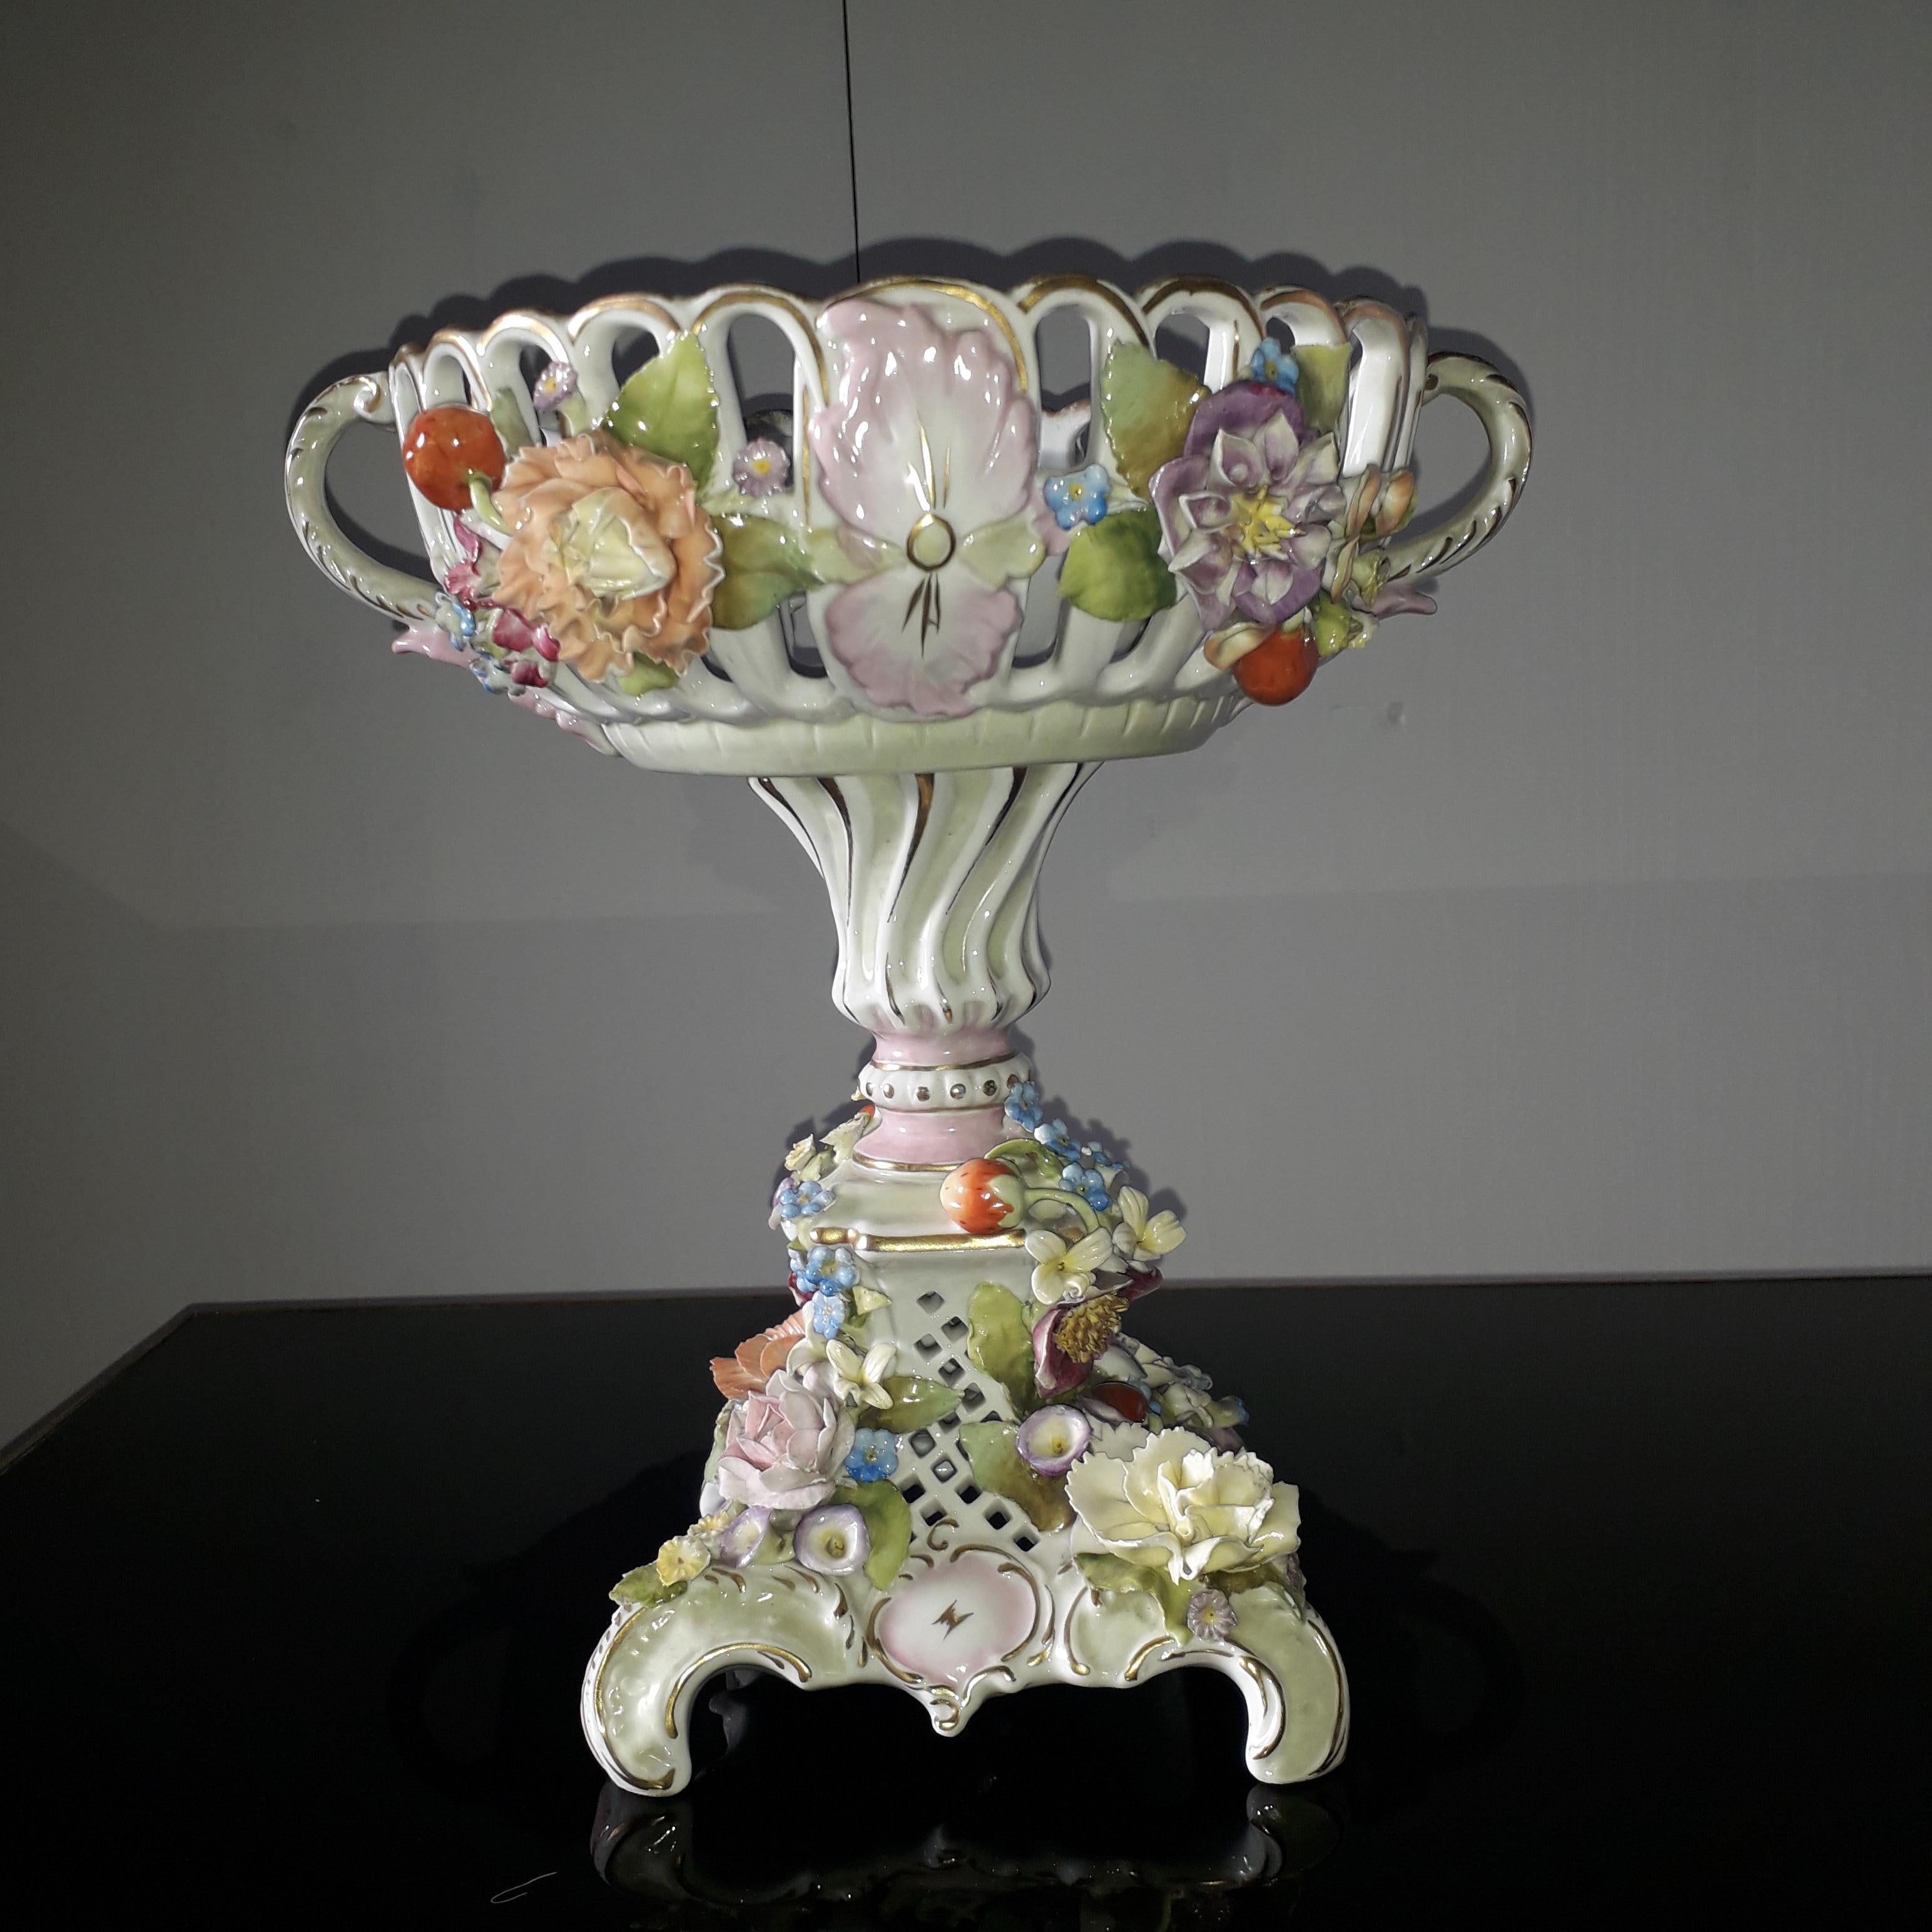 Centrepiece with porcelain flowers and fruit decoration from Saxony in the style of Meissen (Dresden).
Serial number on the bottom and signature with blue swords.
Circa: 1880
Some chips on the flower petals.